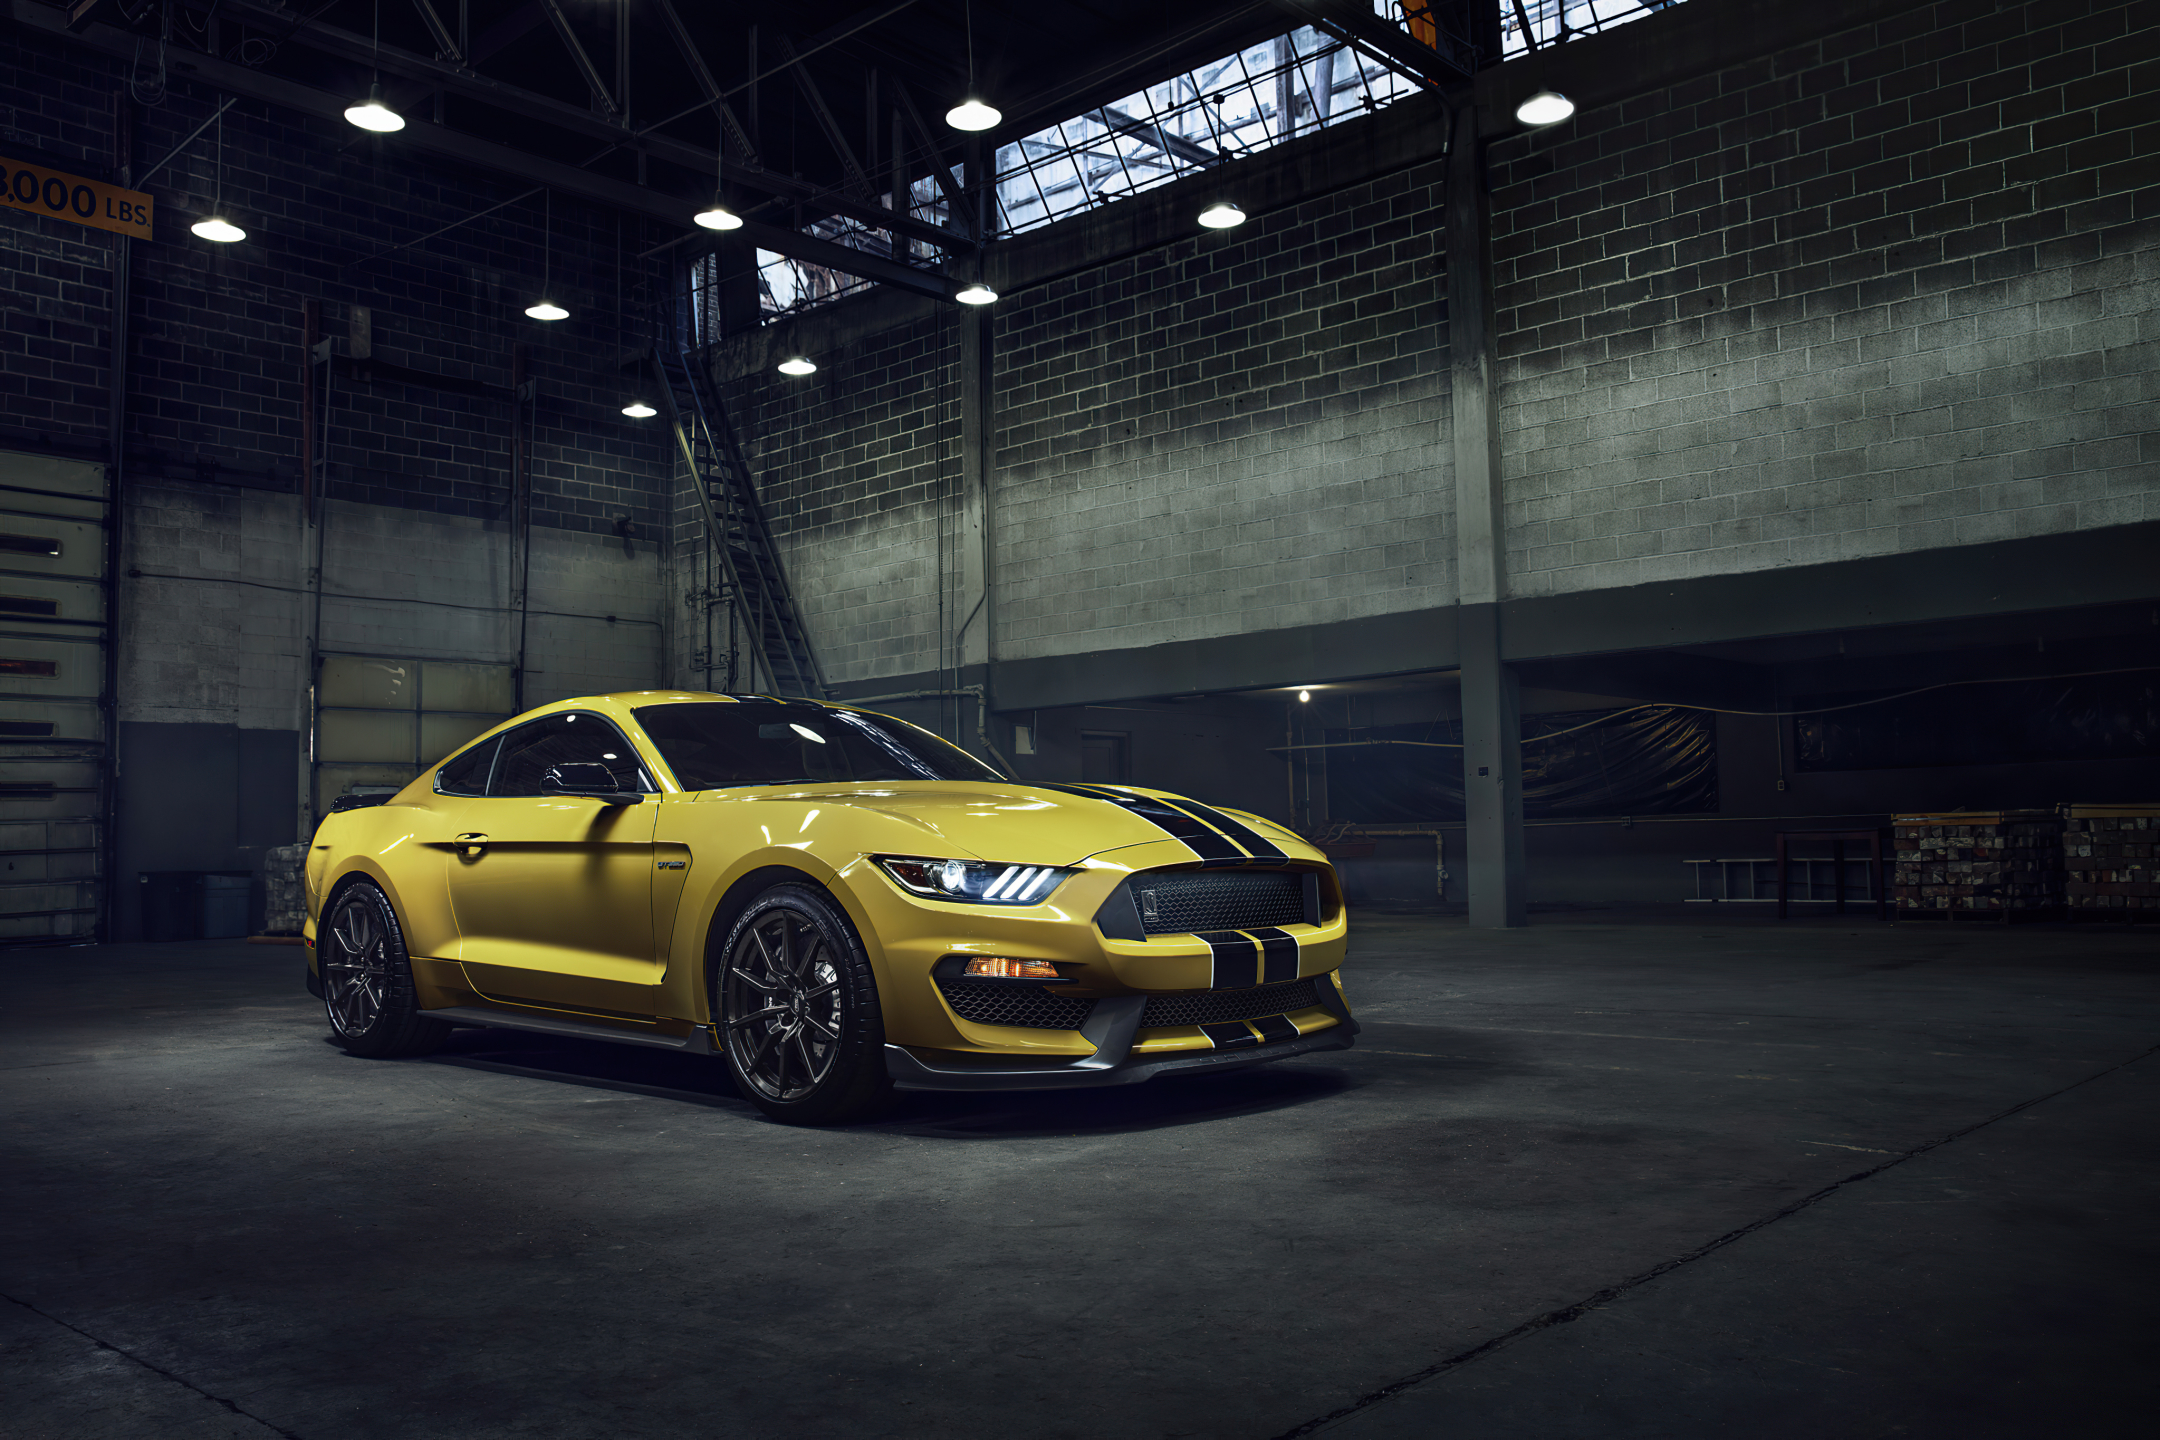 ford mustang, vehicles, ford mustang gt350, fford mustang gt350, yellow car, ford, muscle car, car